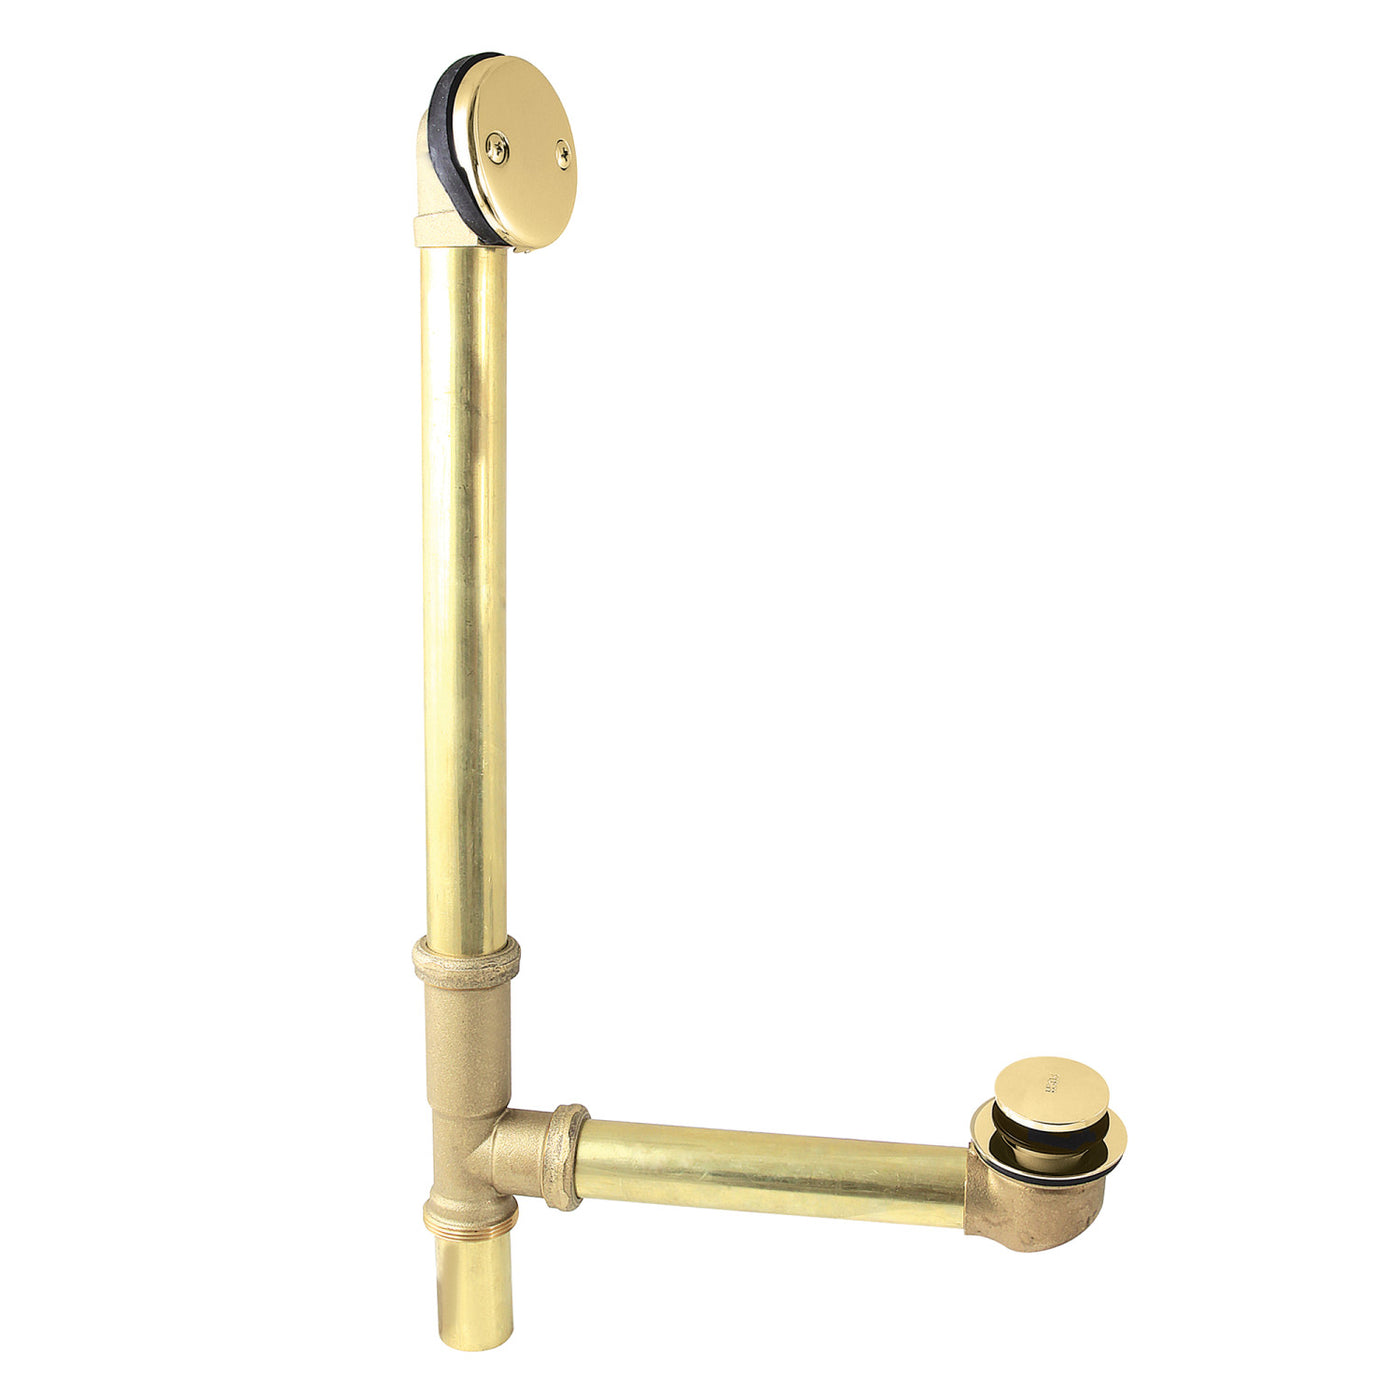 Elements of Design EDTT2162 21-Inch Tip-Toe Tub Waste and Overflow Drain, 20 Gauge, Polished Brass